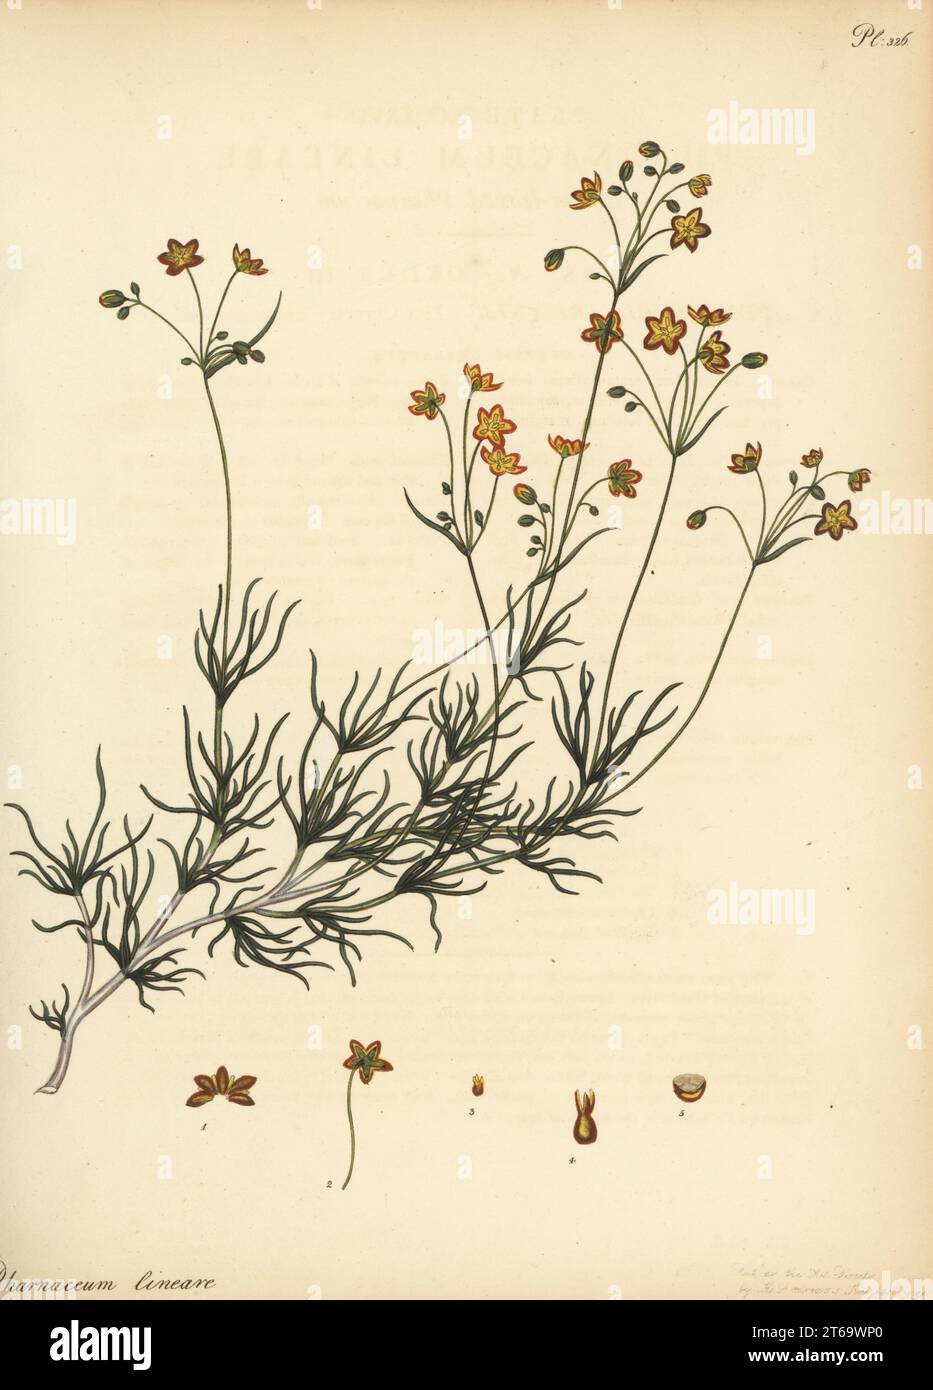 Linear-leaved pharnaceum, Pharnaceum lineare. From the Cape of Good Hope, South Africa, in the George Hibbert collection. Copperplate engraving drawn, engraved and hand-coloured by Henry Andrews from his Botanical Register, Volume 5, self-published in Knightsbridge, London, 1803. Stock Photo